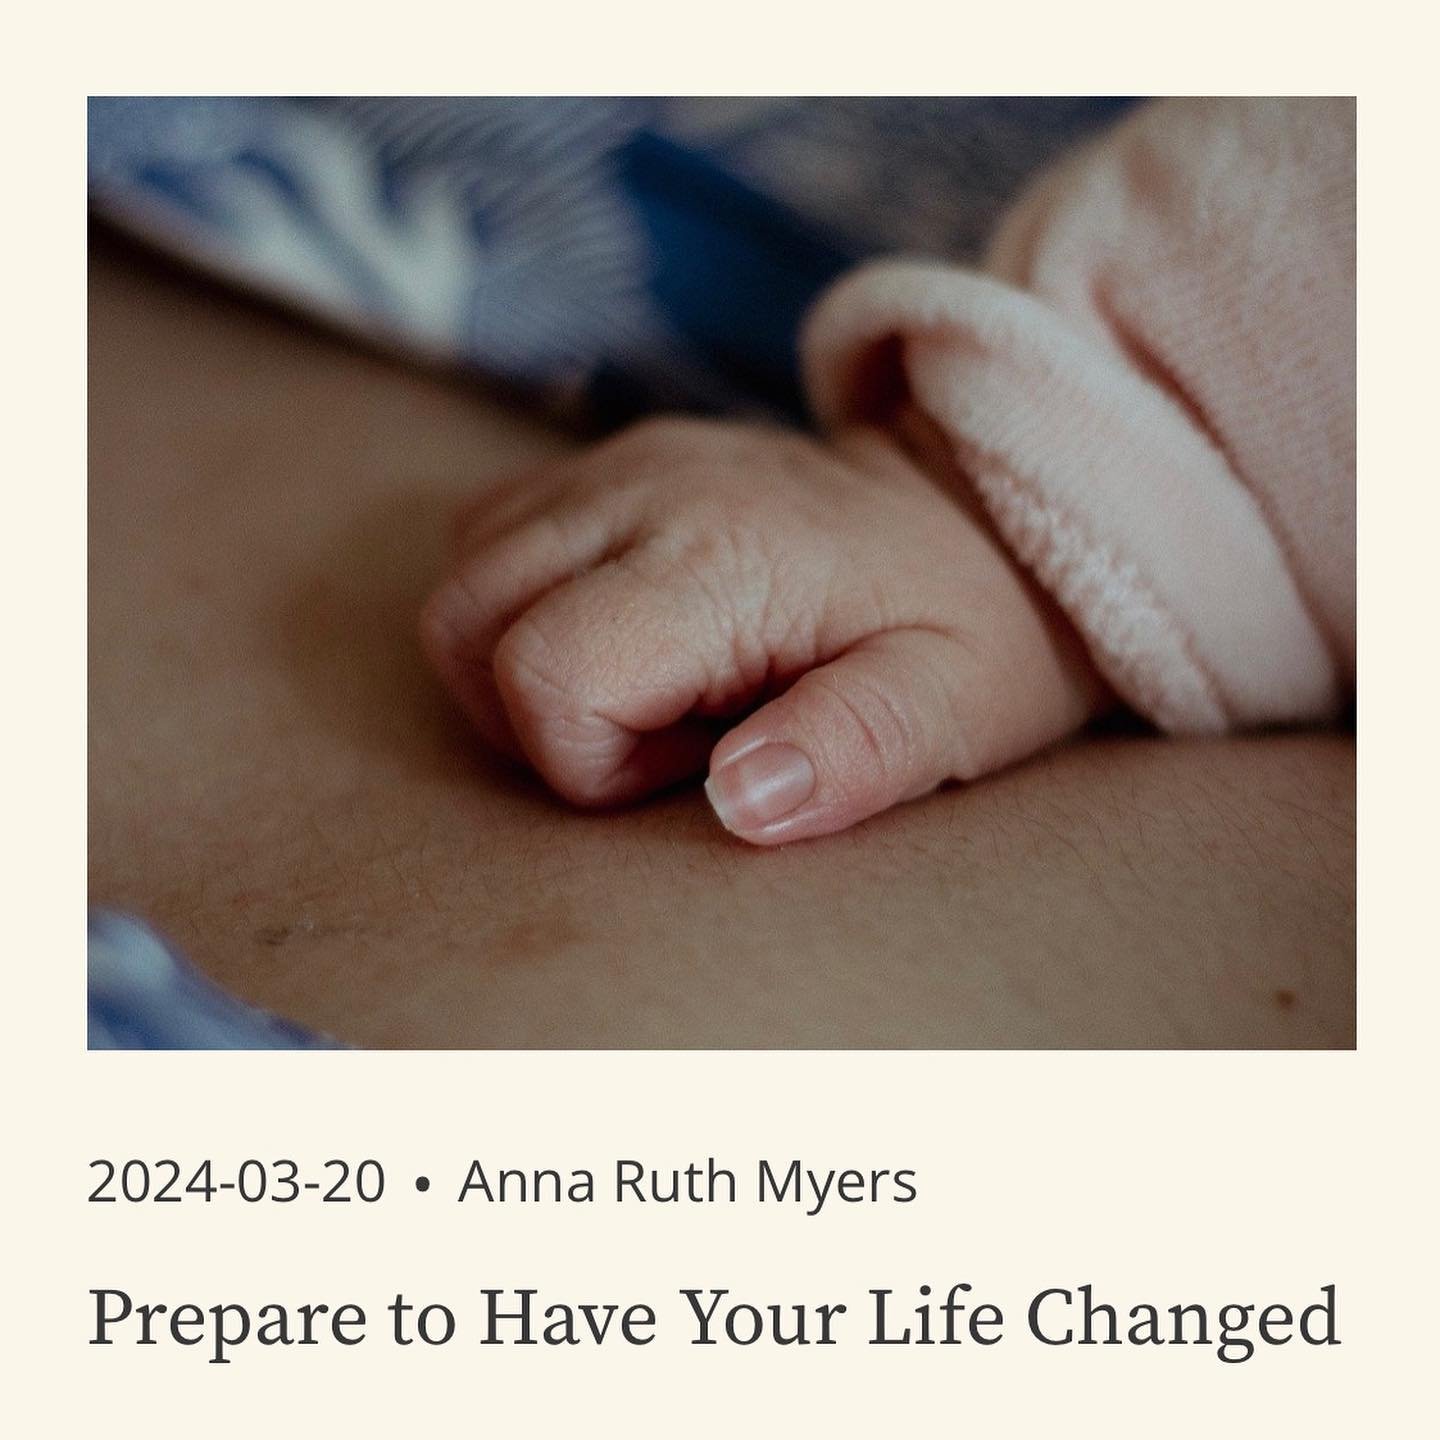 Did you catch these recent posts on the Journal?!

*Respectful Caregiving is a Moral Imperative

*R-E-S-P-E-C-T

*Prepare to Have Your Life Changed

TRUTH 🙌

Parenthood will change you in many ways you never imagined it could. 

While it&rsquo;s tru